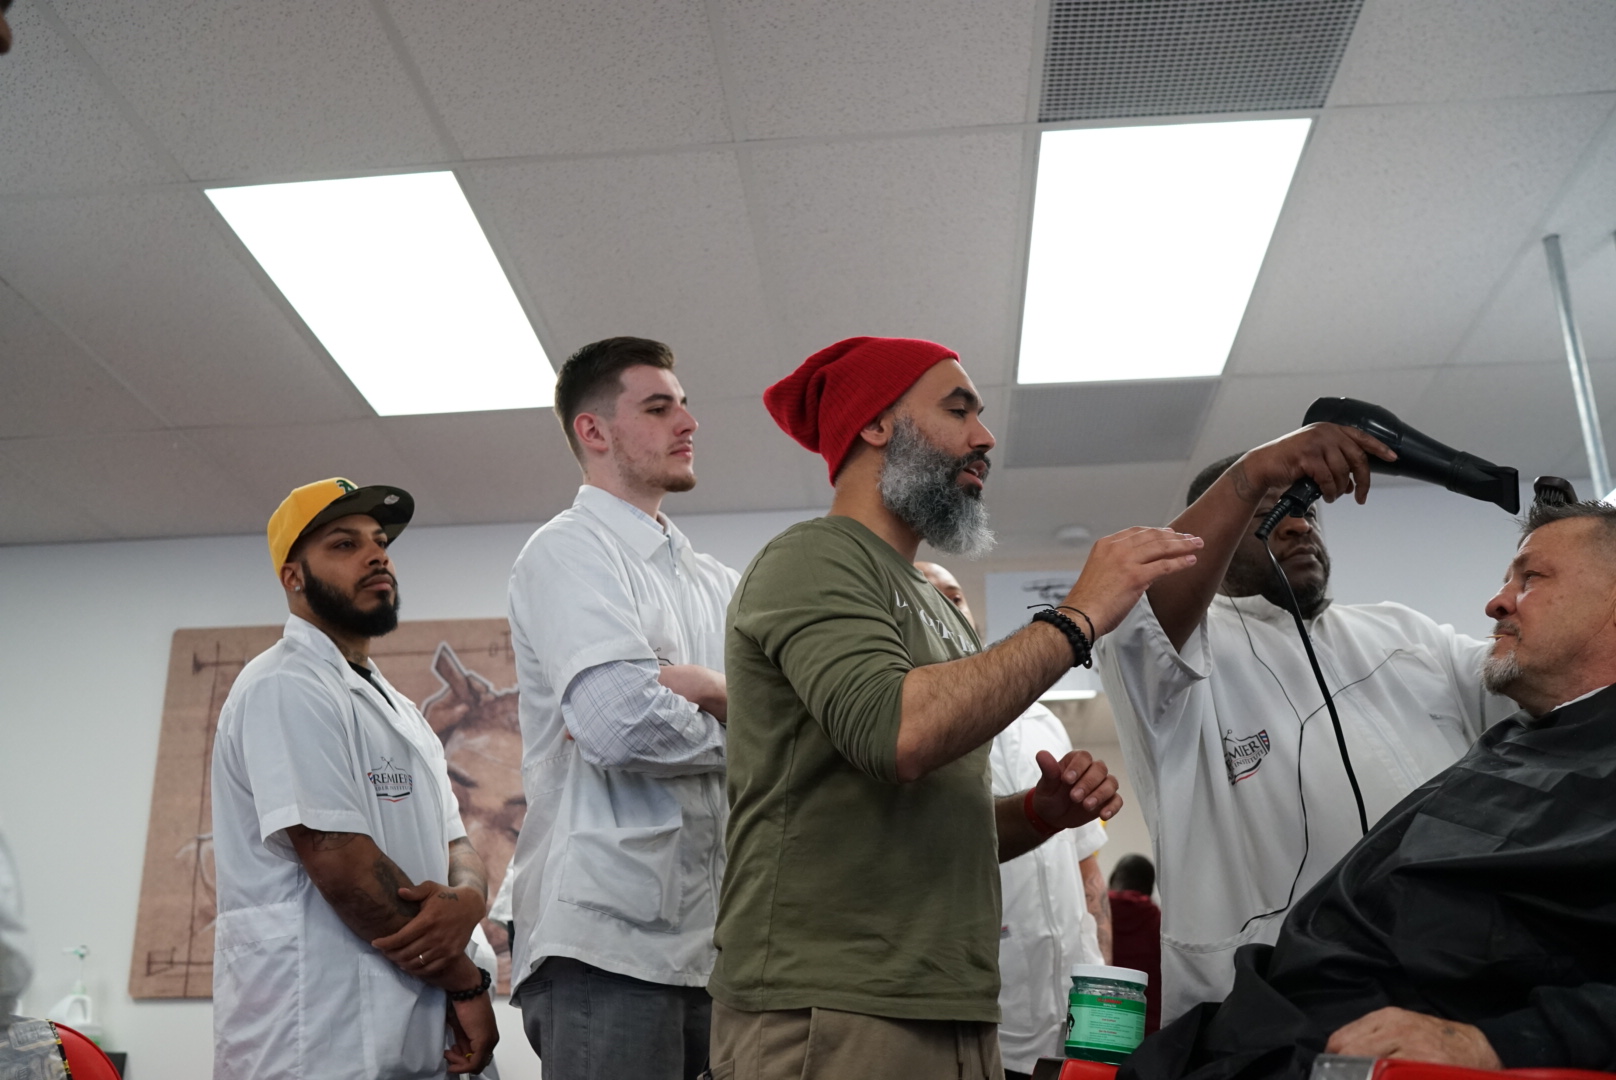 Barber instructor showing techniques to students